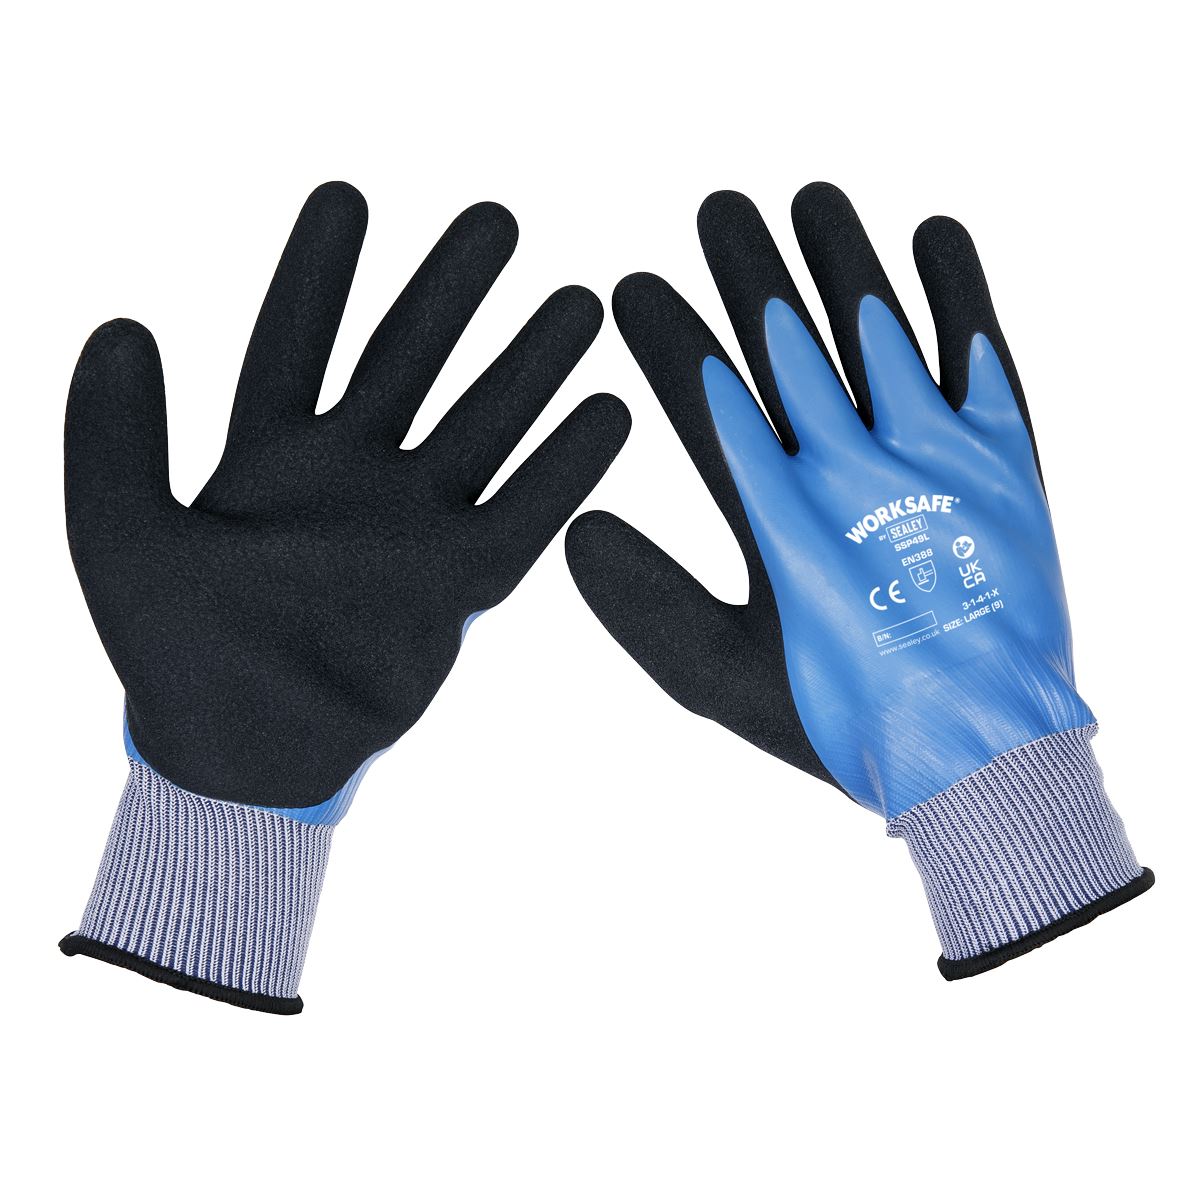 Worksafe by Sealey Waterproof Latex Gloves - (Large) - Pack of 6 Pairs